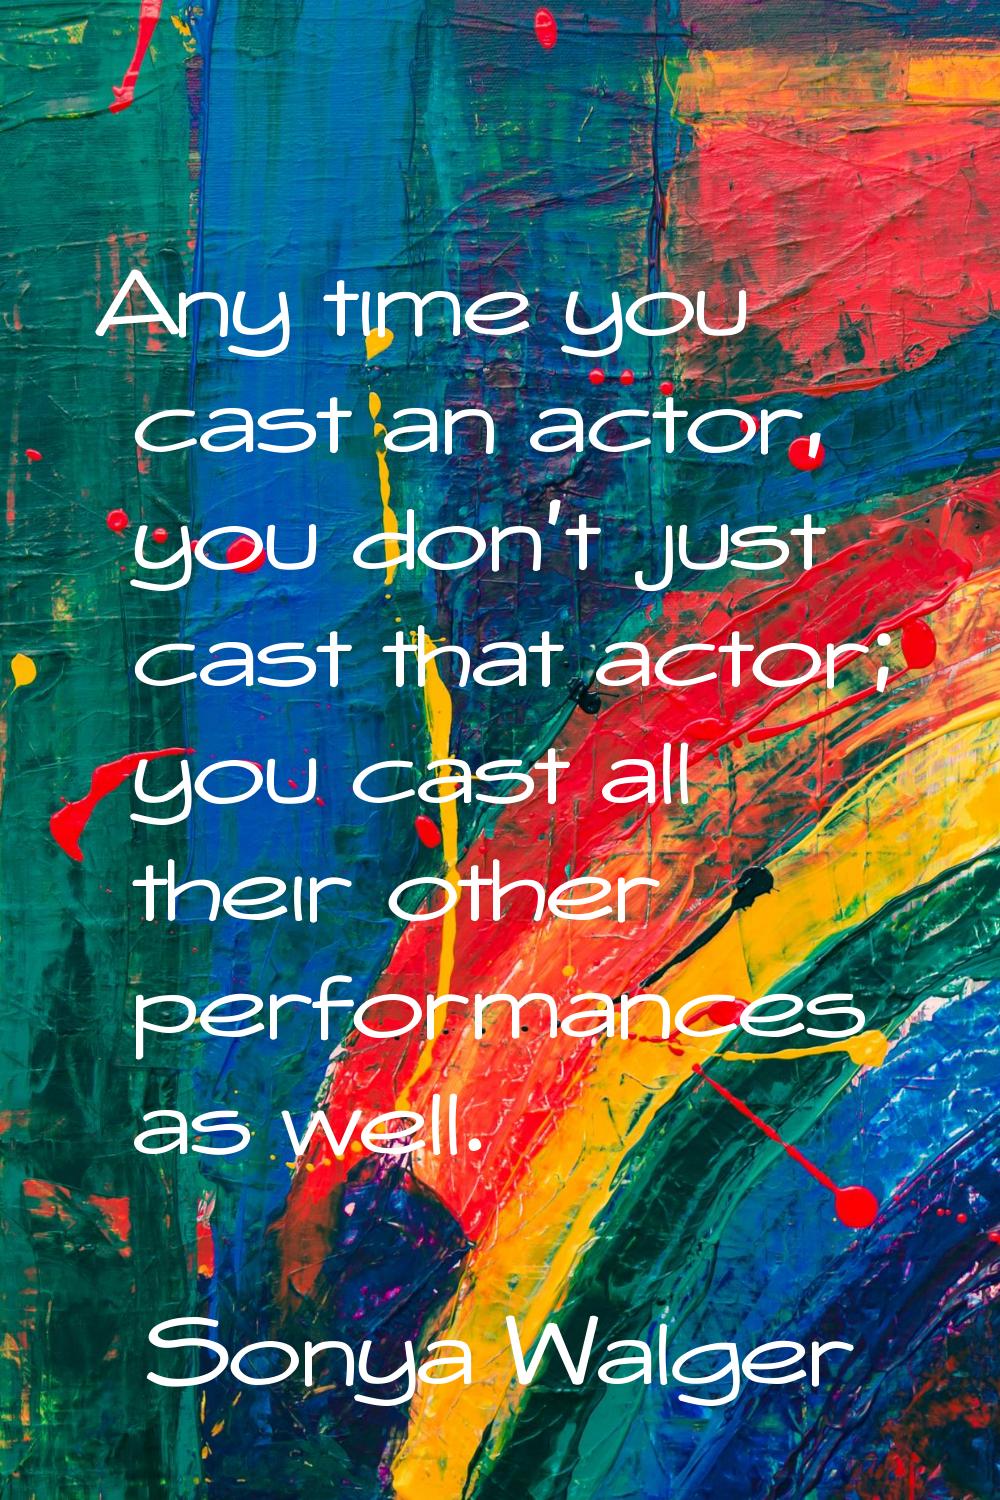 Any time you cast an actor, you don't just cast that actor; you cast all their other performances a